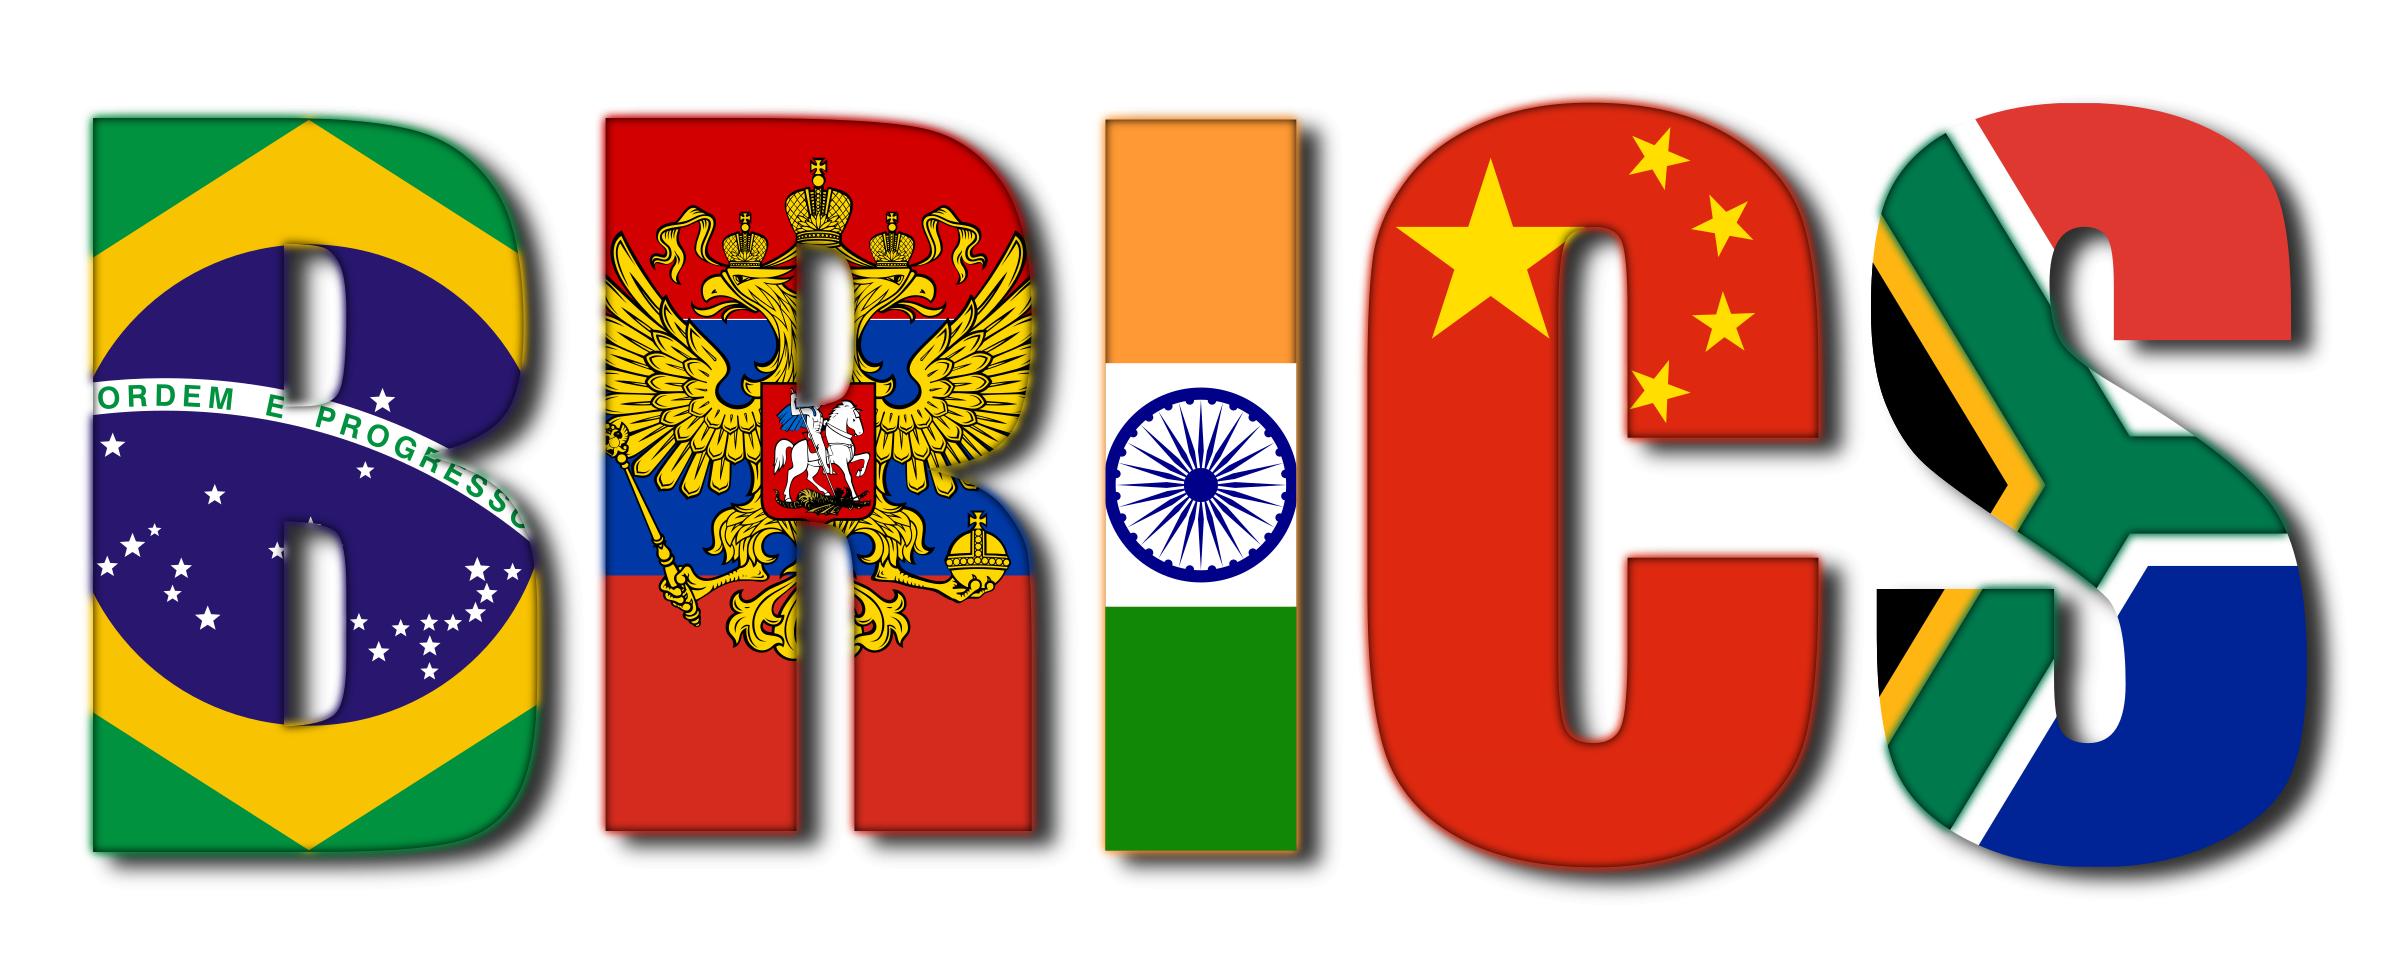 BRICS (Brazil, Russia, India, China, South Africa) png icons